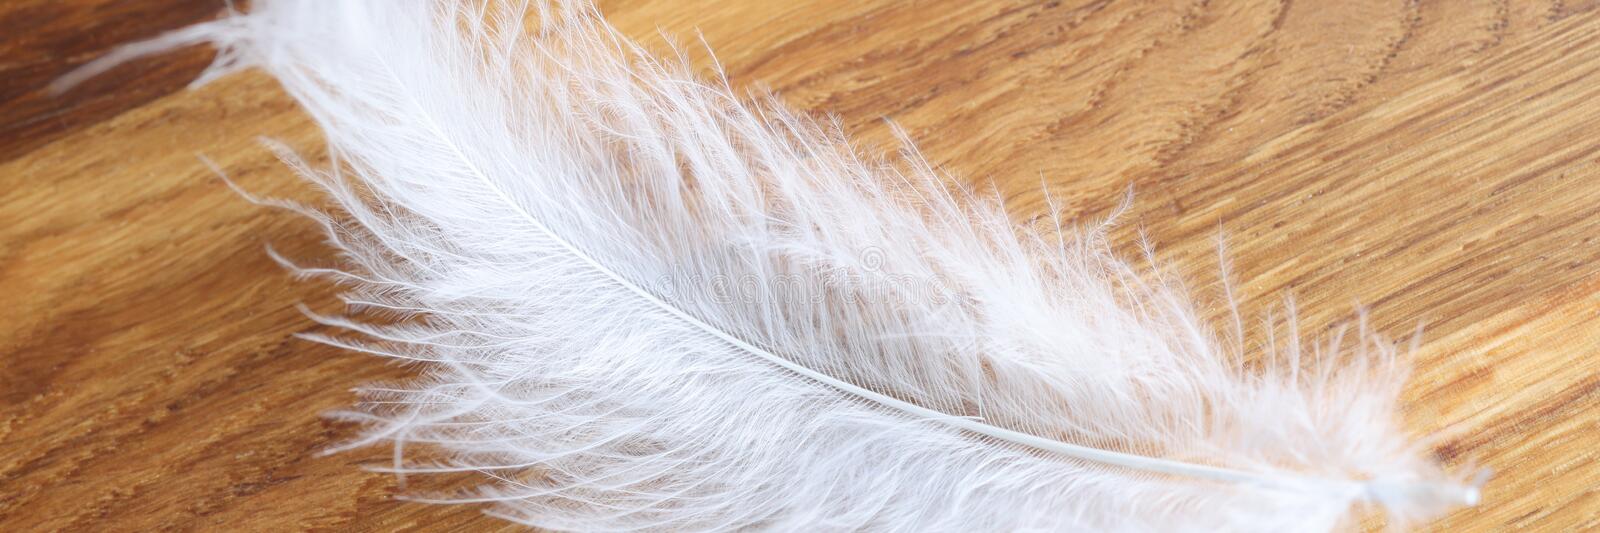 Feathers for filling a duvet